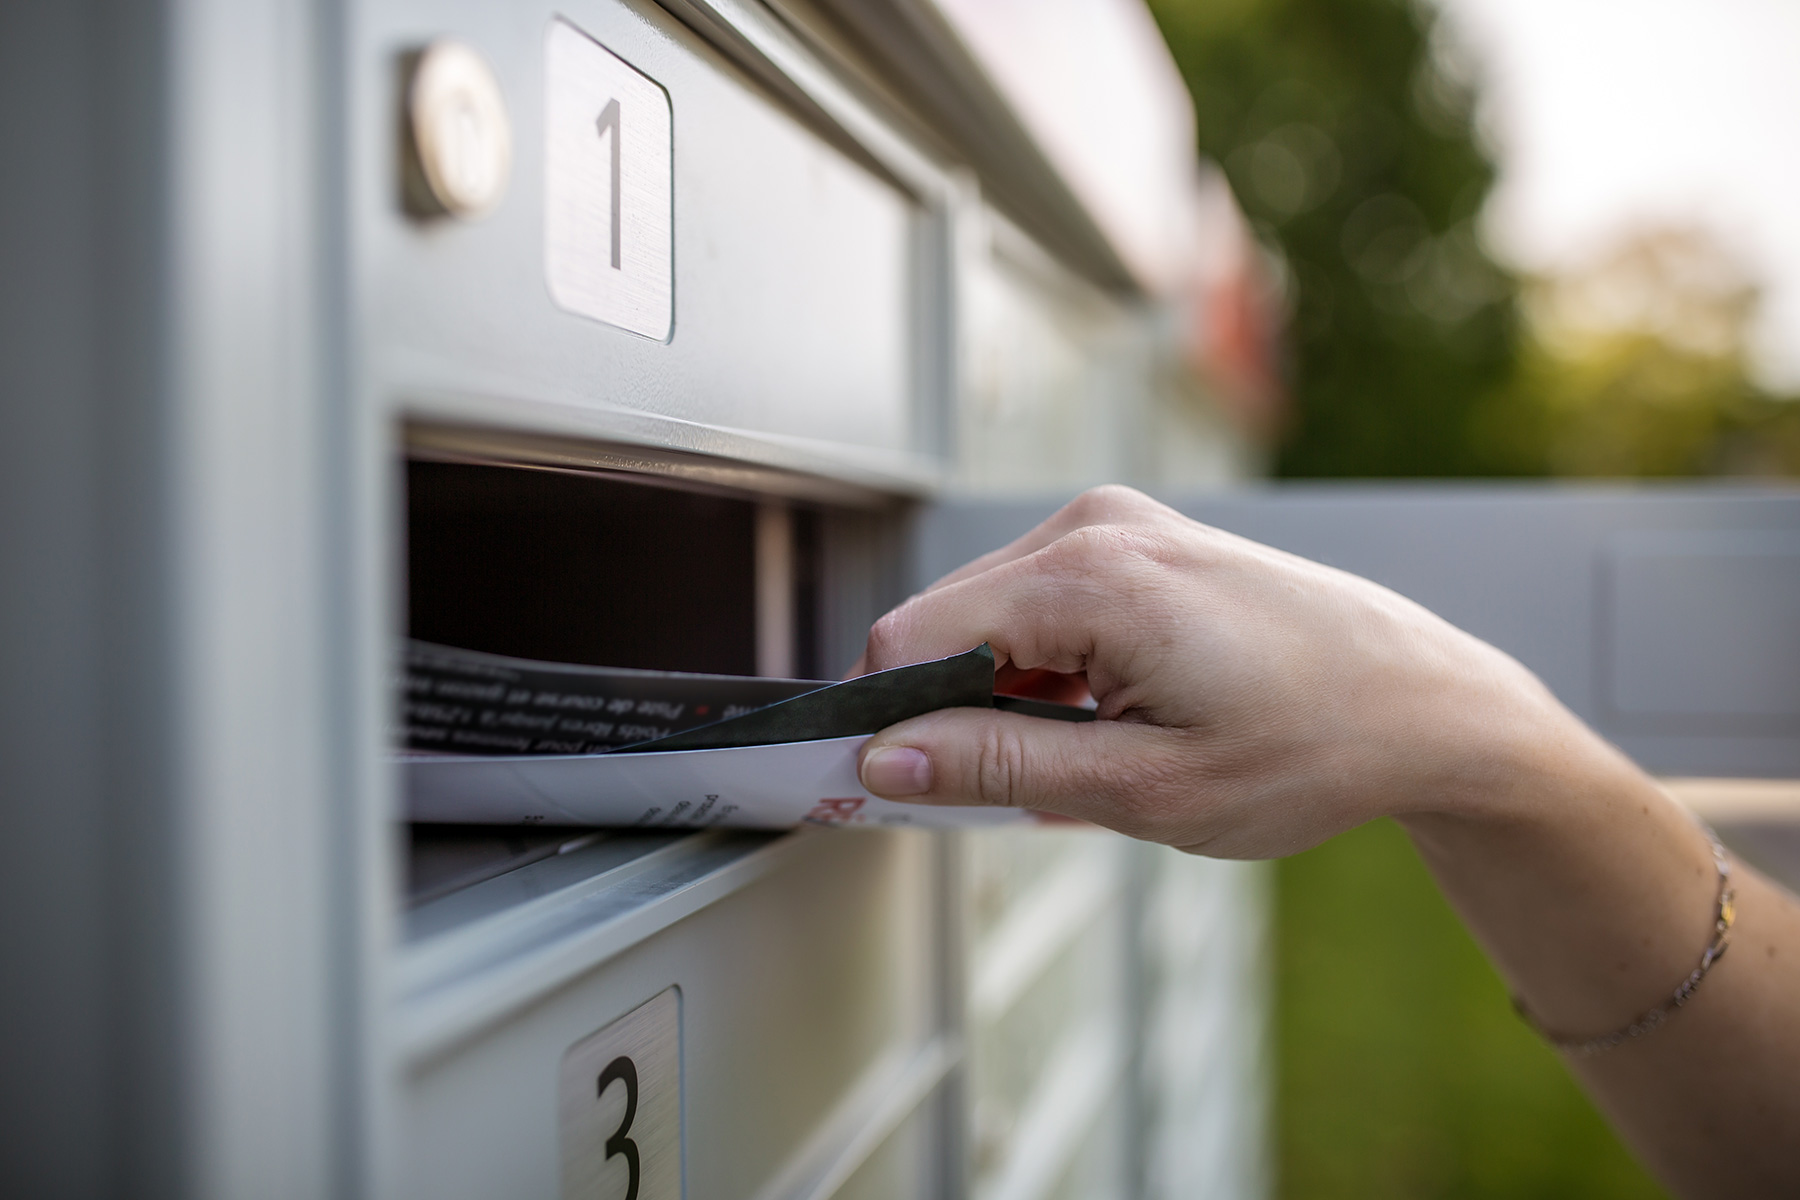 What Are The Primary Difference Between The Online And Offline Mailing Services?